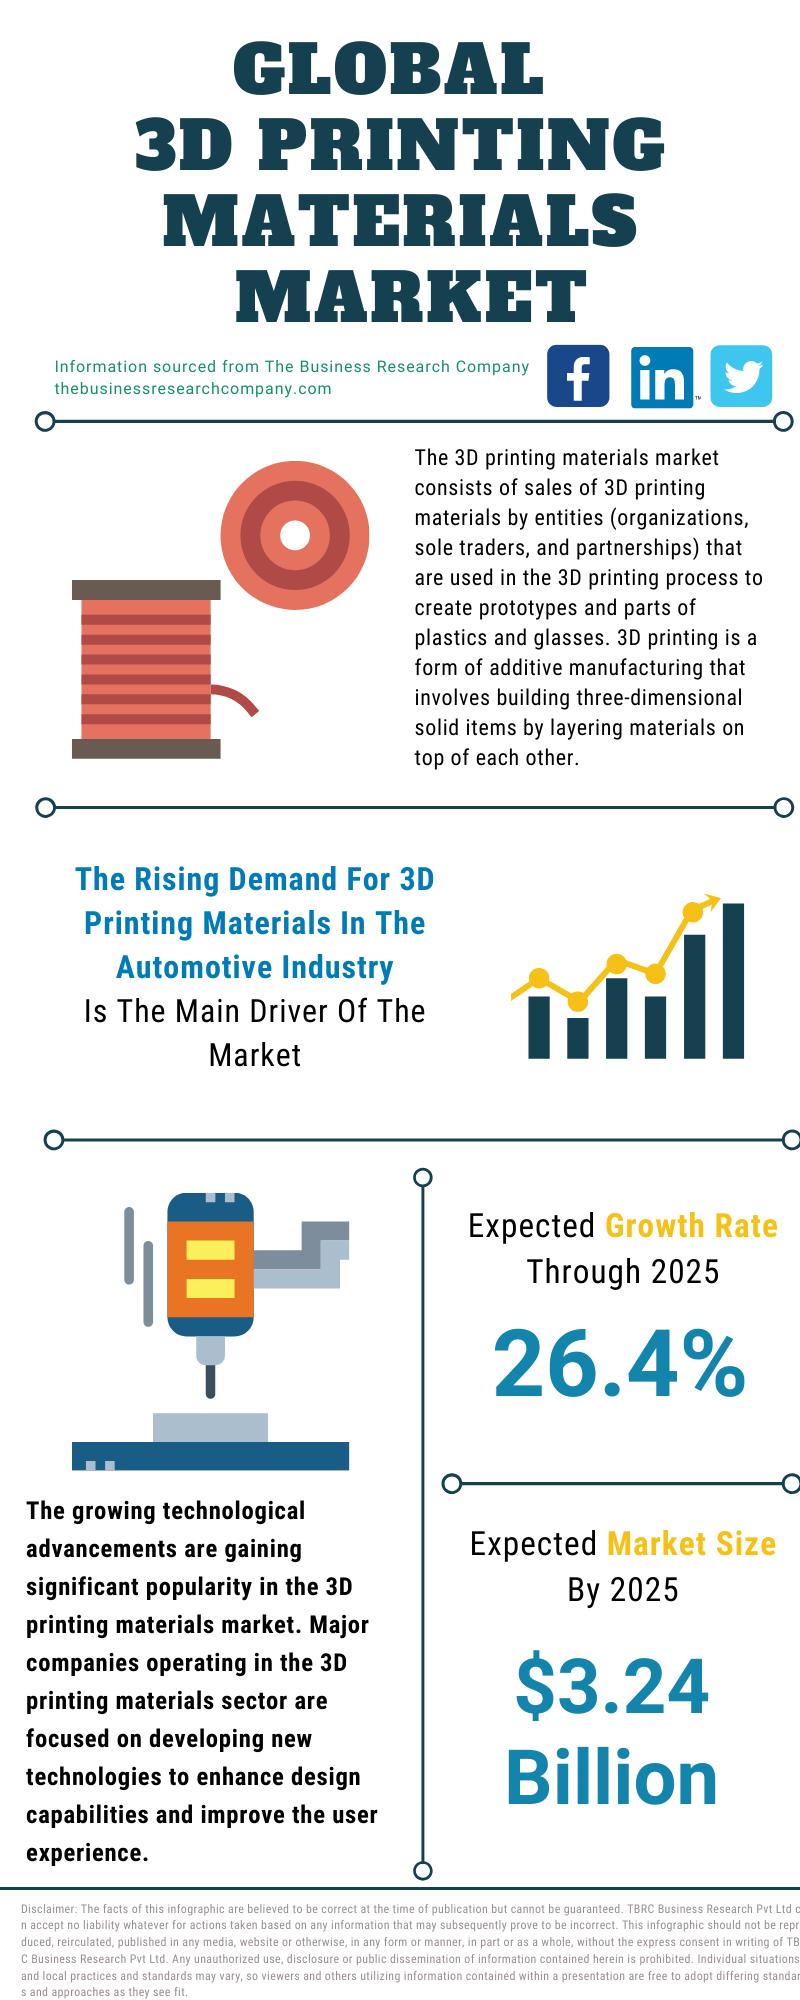 3D Printing Ceramics Market Innovative Strategy by 2028 | 3D Systems Corporation, Stratasys, Ltd., EOS GmbH Electro Optical Systems, CRP Group, Materialise NV 